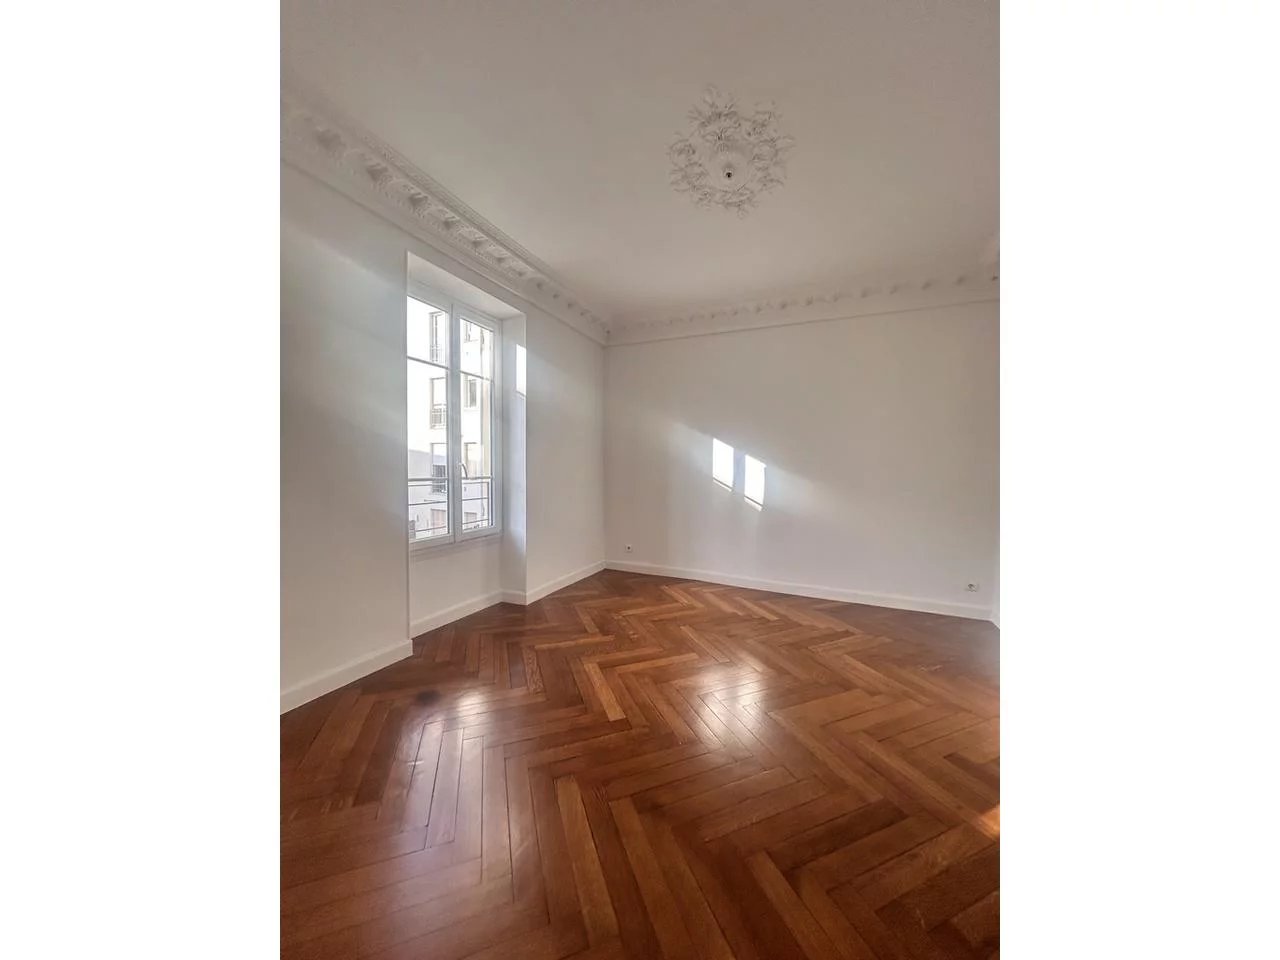 Appartement  4 Rooms 85m2  for sale   449 000 €